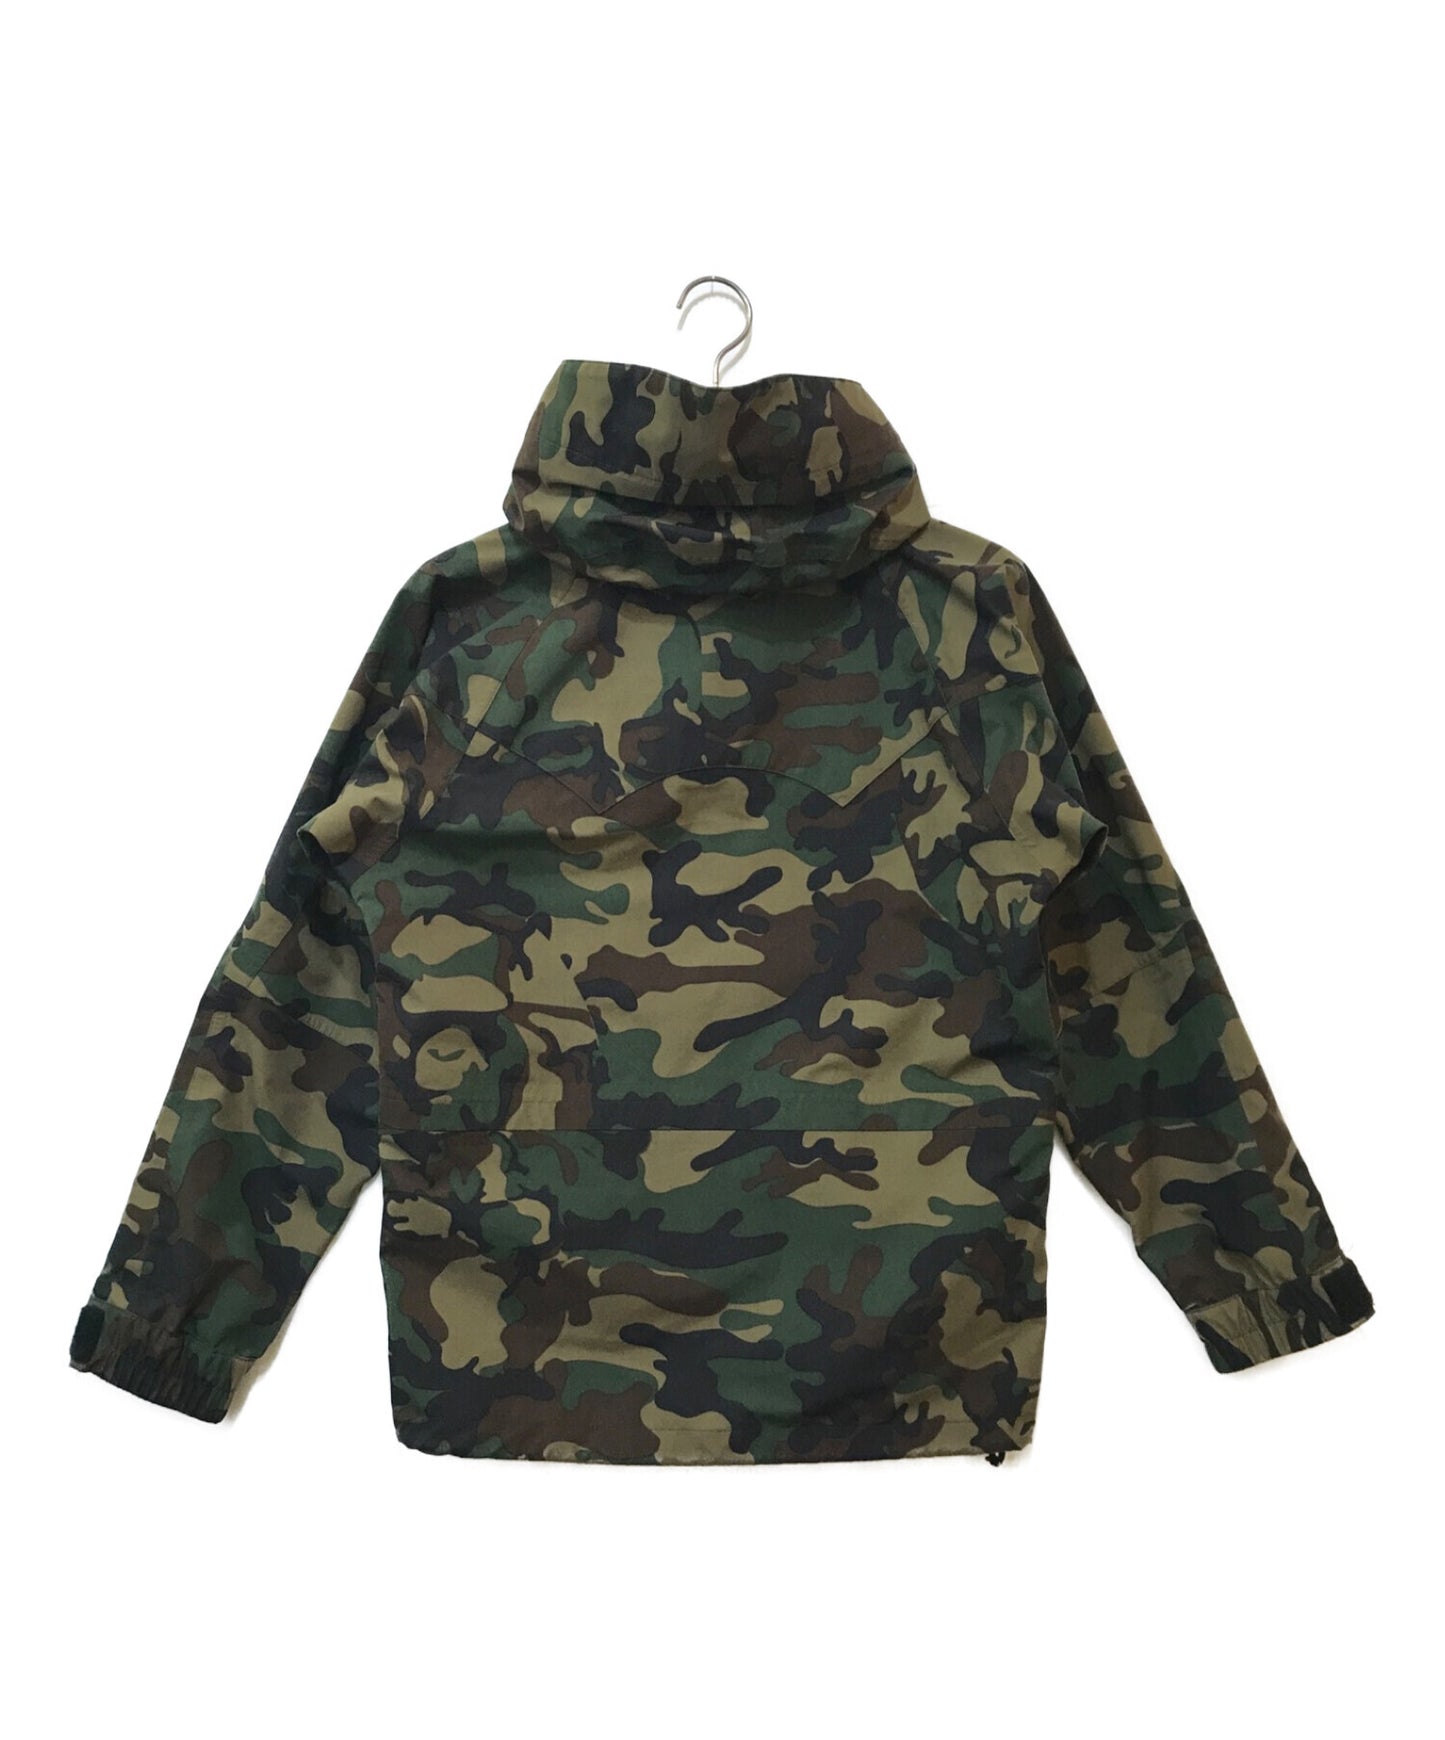 [Pre-owned] A BATHING APE GORE-TEX Snowboard Jacket/Mountain Parka/Shell Jacket 6870-141-057